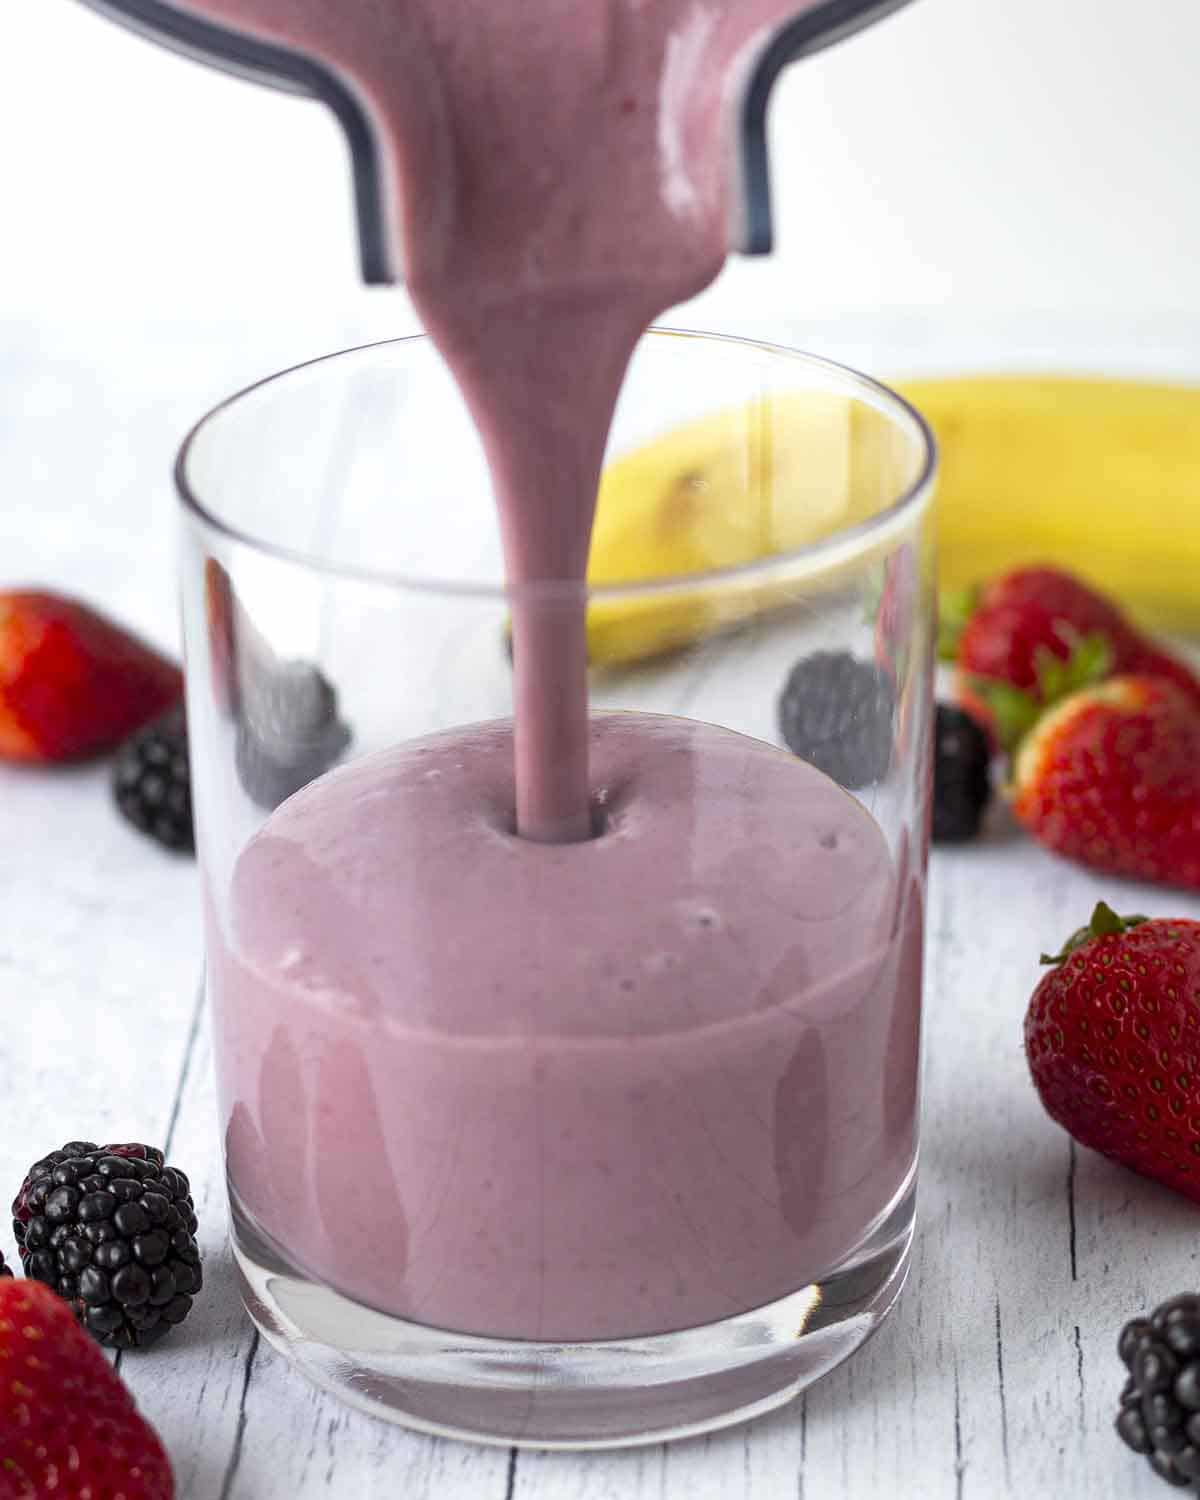 Freshly blended strawberry banana smoothie being poured from a blender container into a glass.